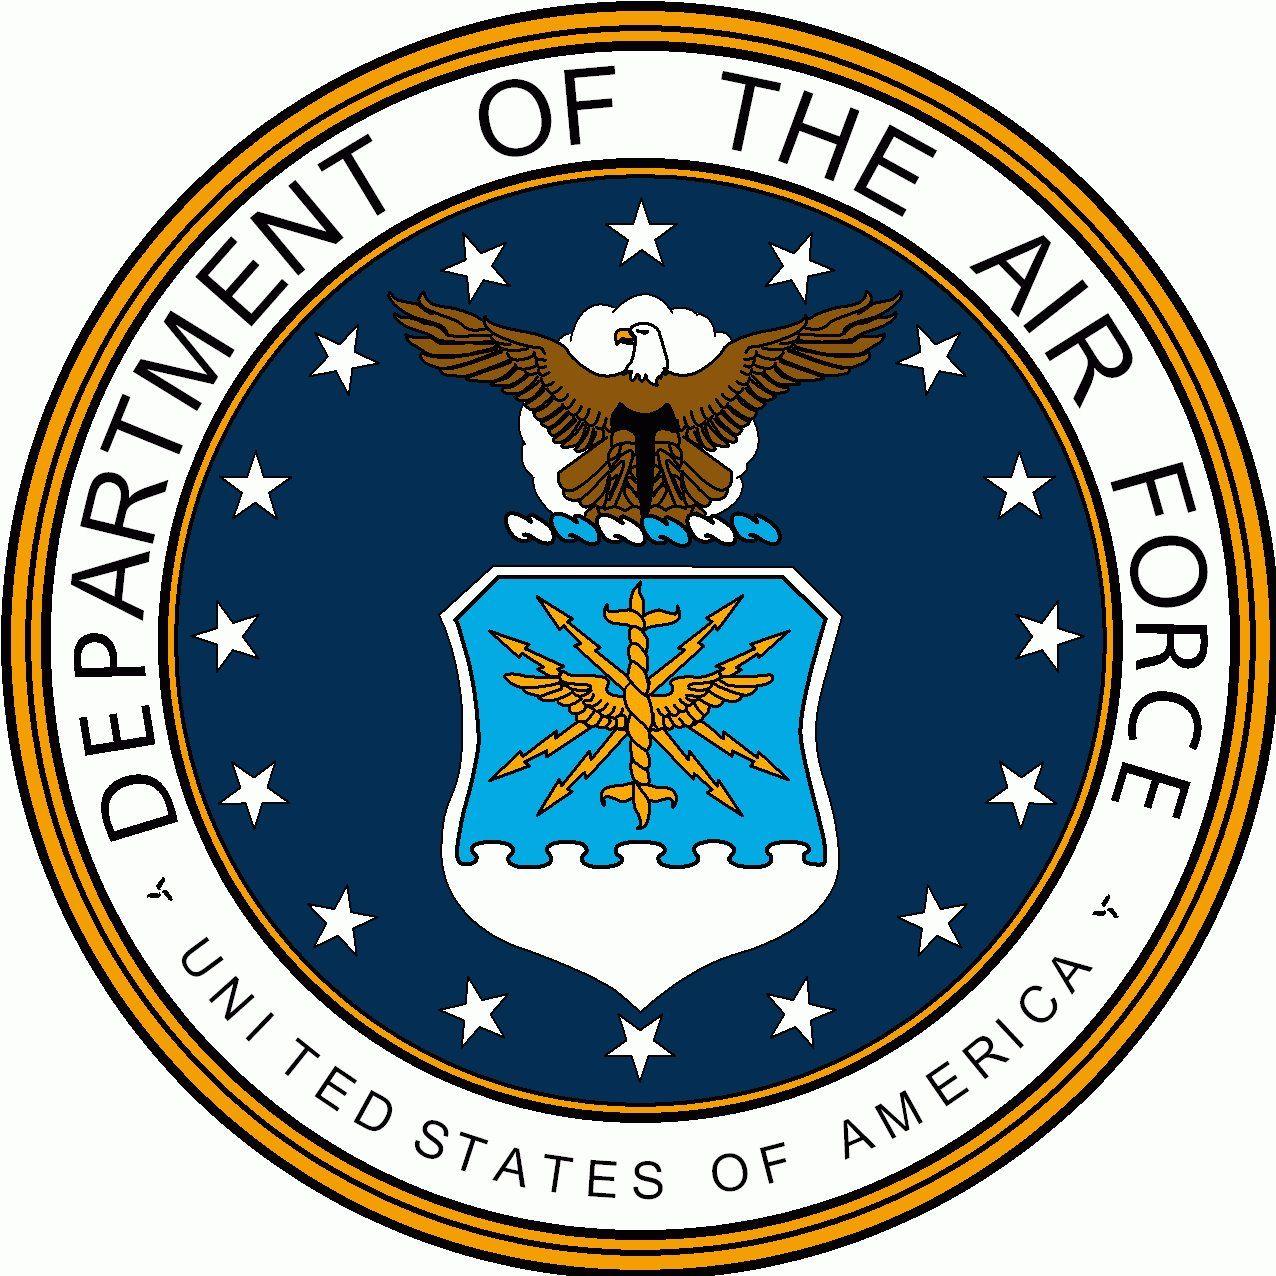 www Air Force Logo - Air Force Logo Transparent PNG Pictures - Free Icons and PNG Backgrounds